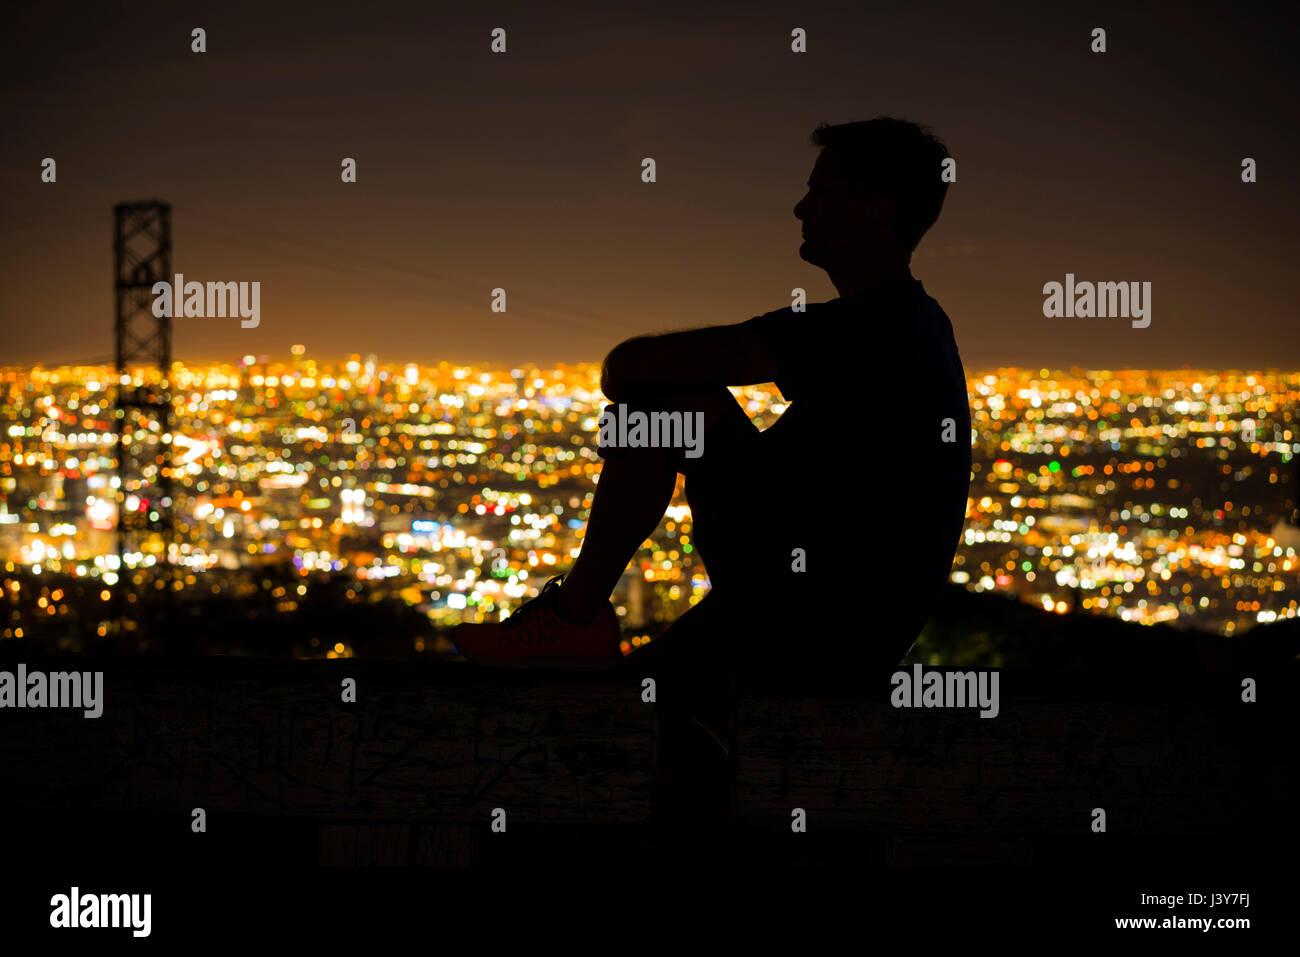 Silhouette of jogger on bench looking away at view, Runyon Canyon, Los Angeles, California, USA Stock Photo